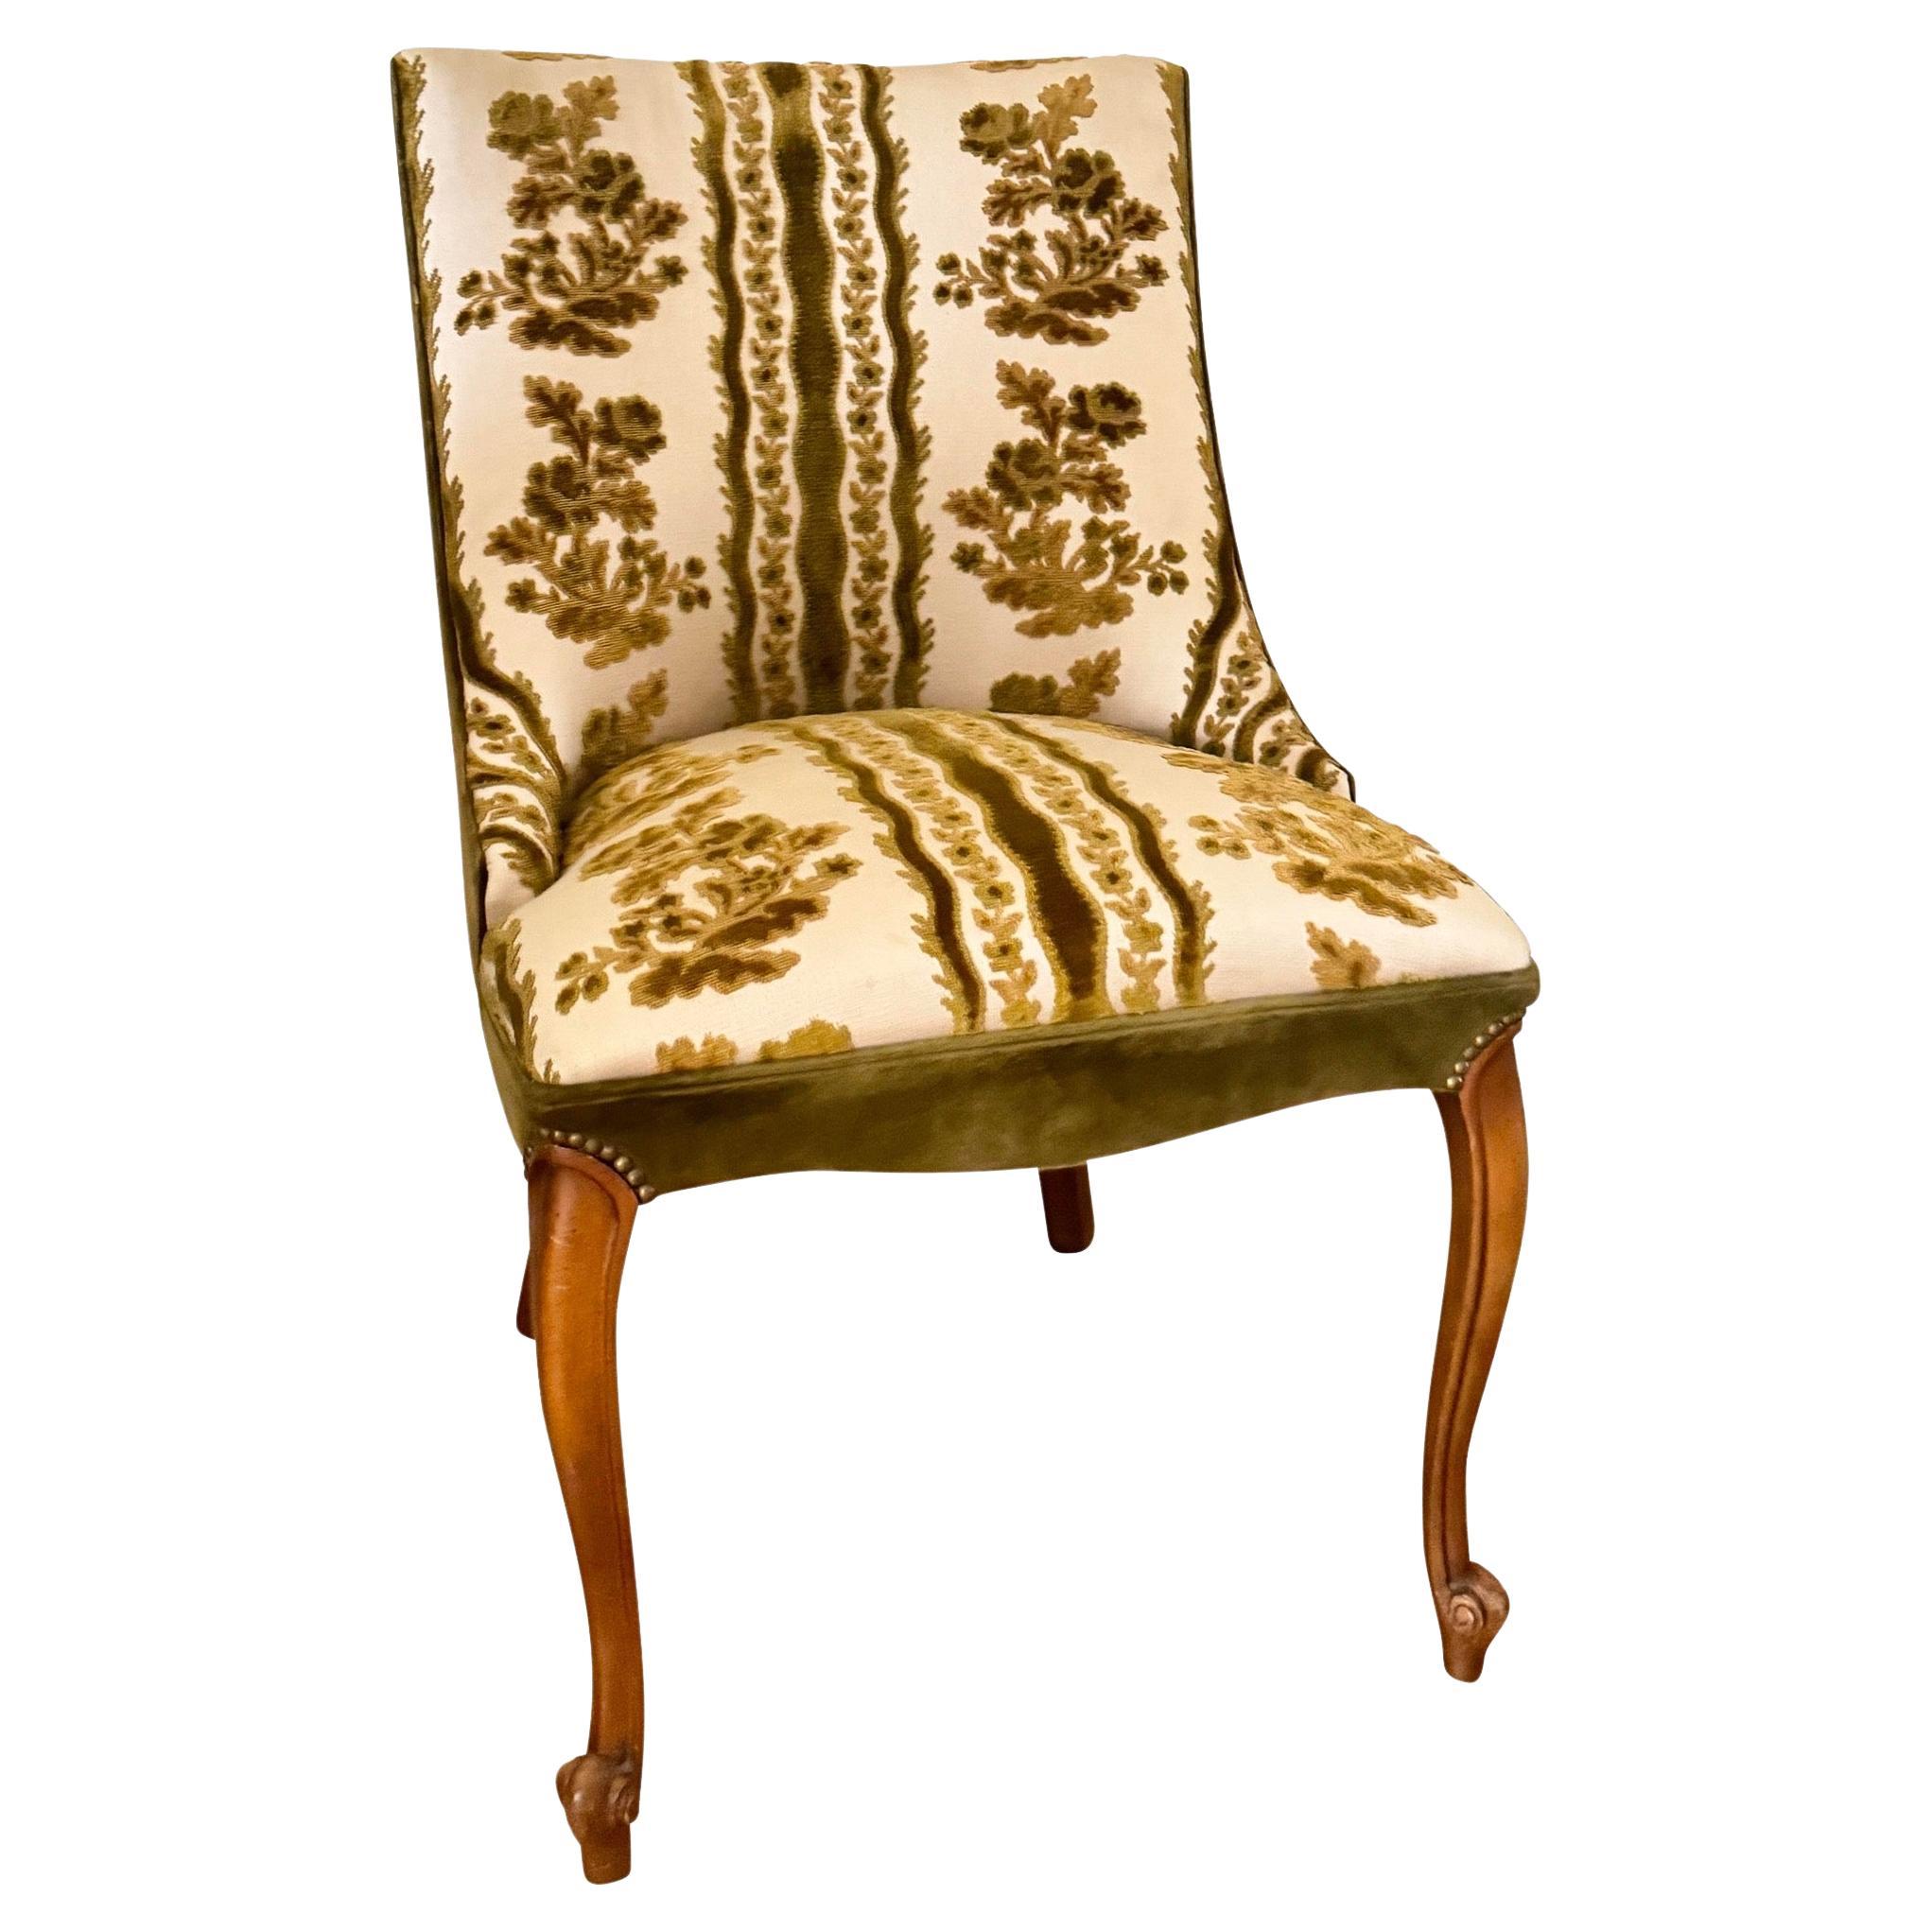 1950s Vintage Walnut Scoop Back Accent Chair With Cabriole Legs For Sale